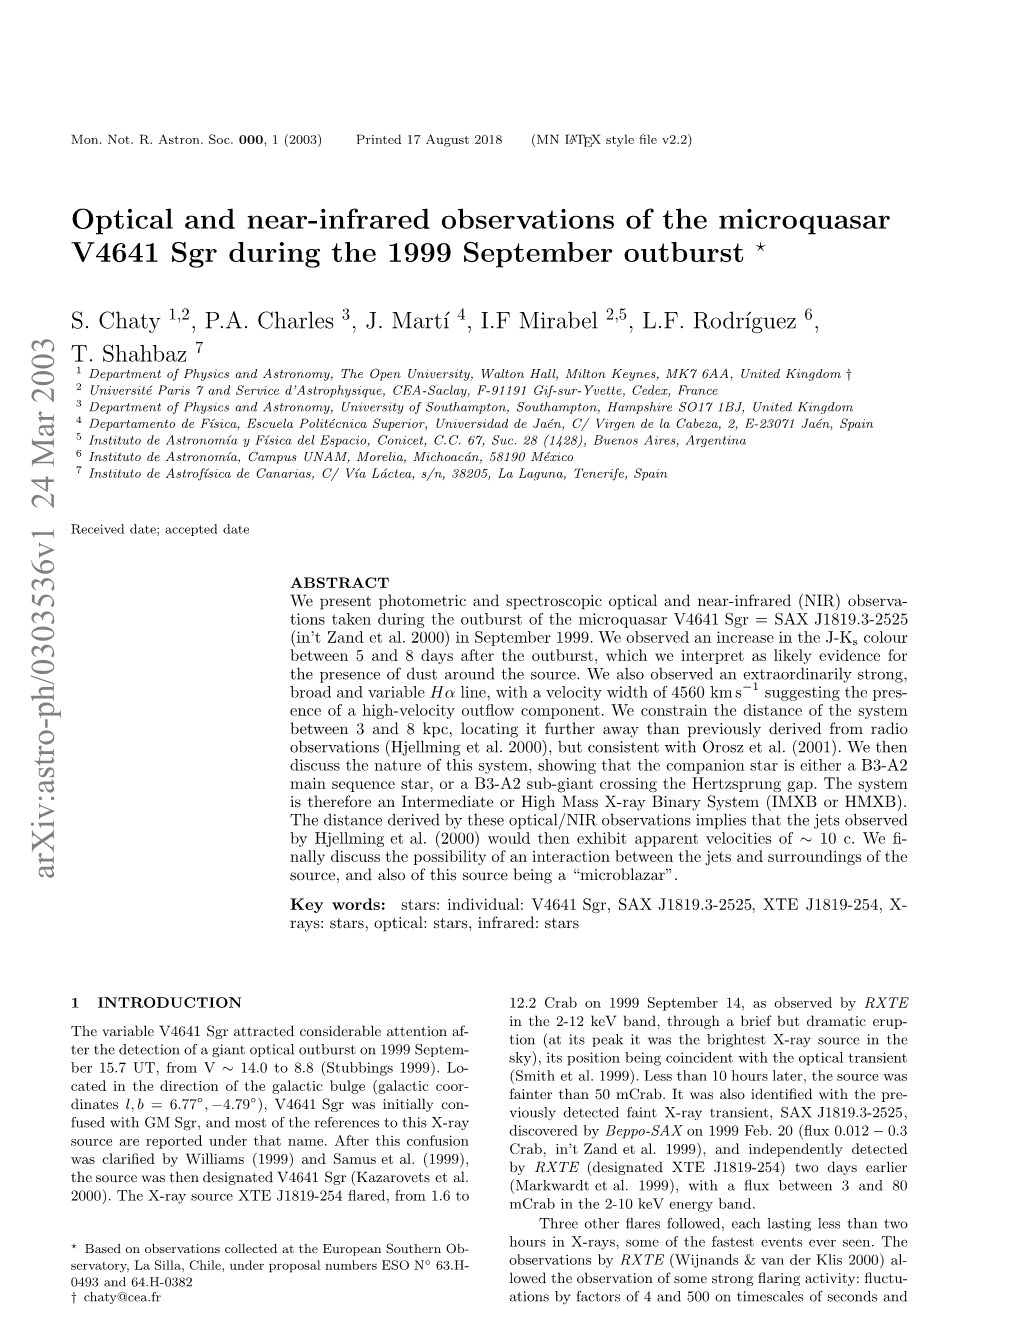 Optical and Near-Infrared Observations of the Microquasar V4641